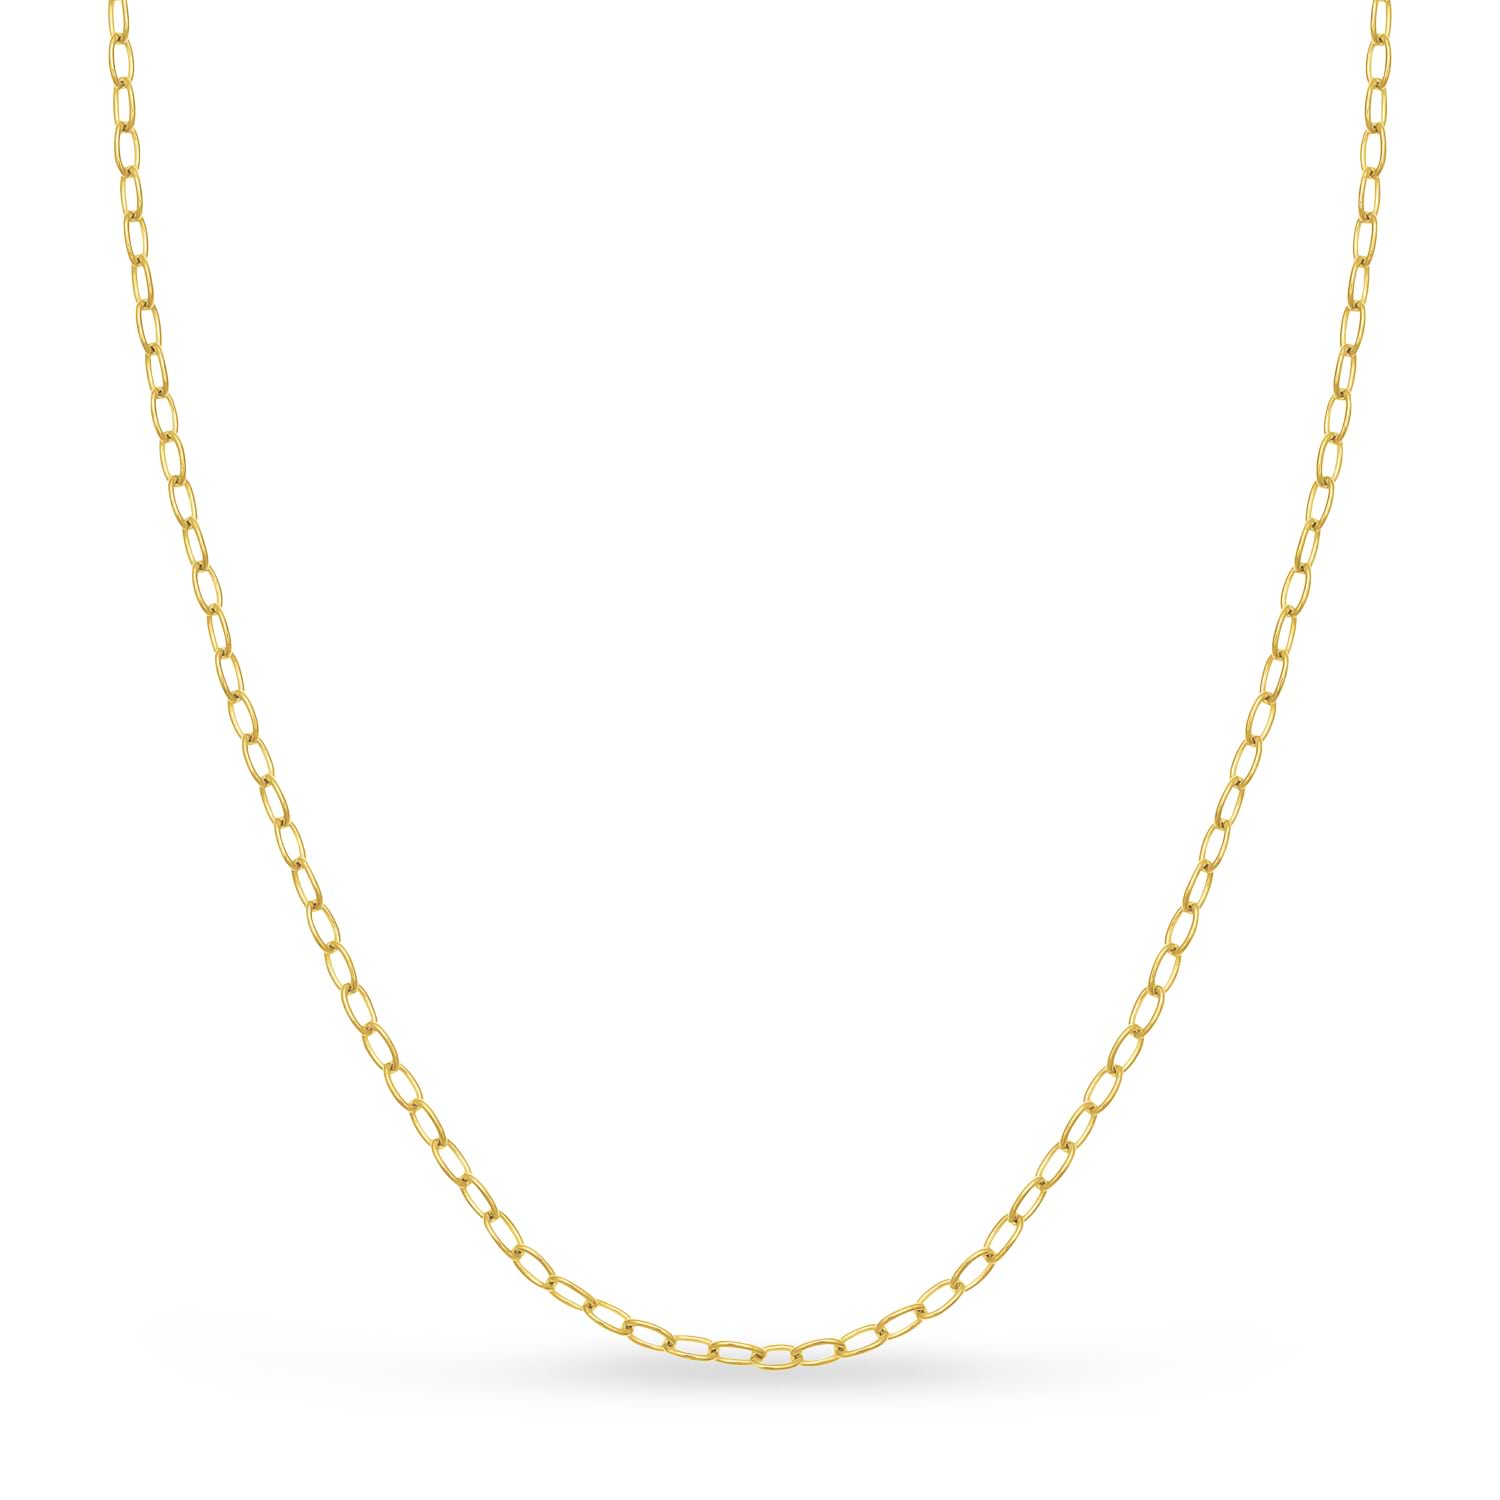 Forzentina Chain Necklace With Lobster Lock 14k Yellow Gold